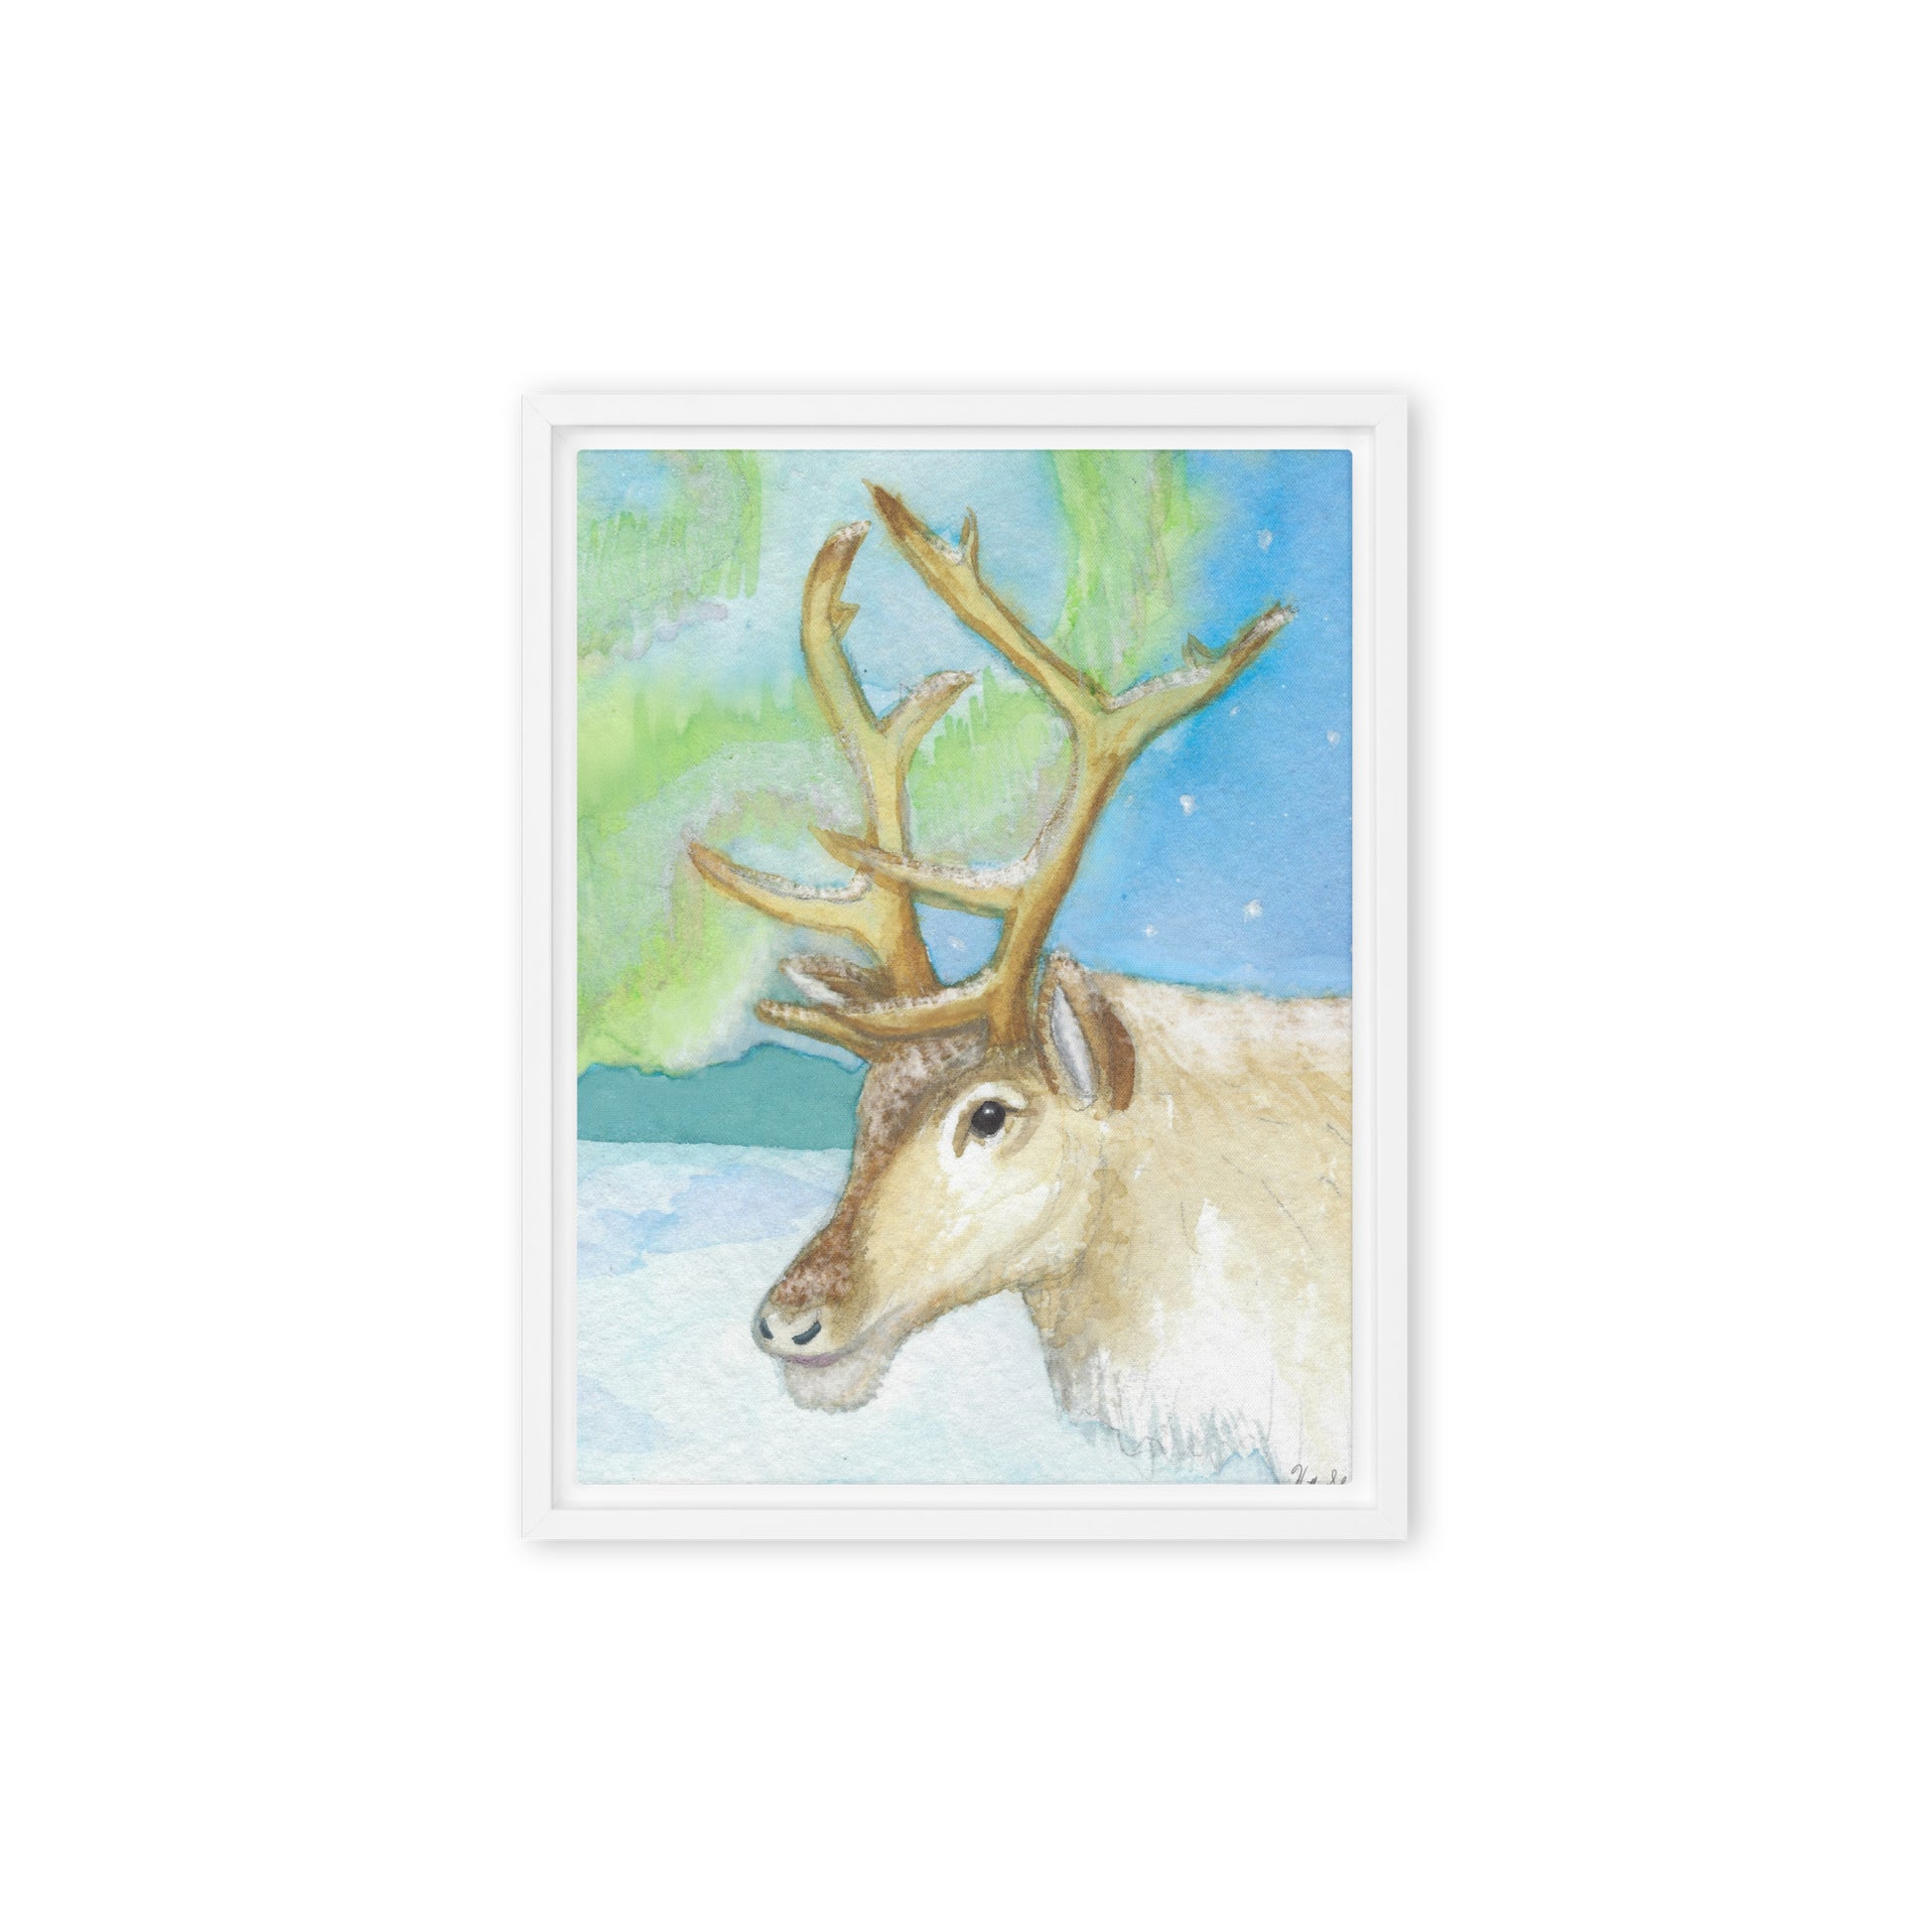 9 by 12 inch framed canvas art print of Heather Silver's Northern Lights Reindeer.  Canvas print mounted in a white pine frame. Hanging hardware included.